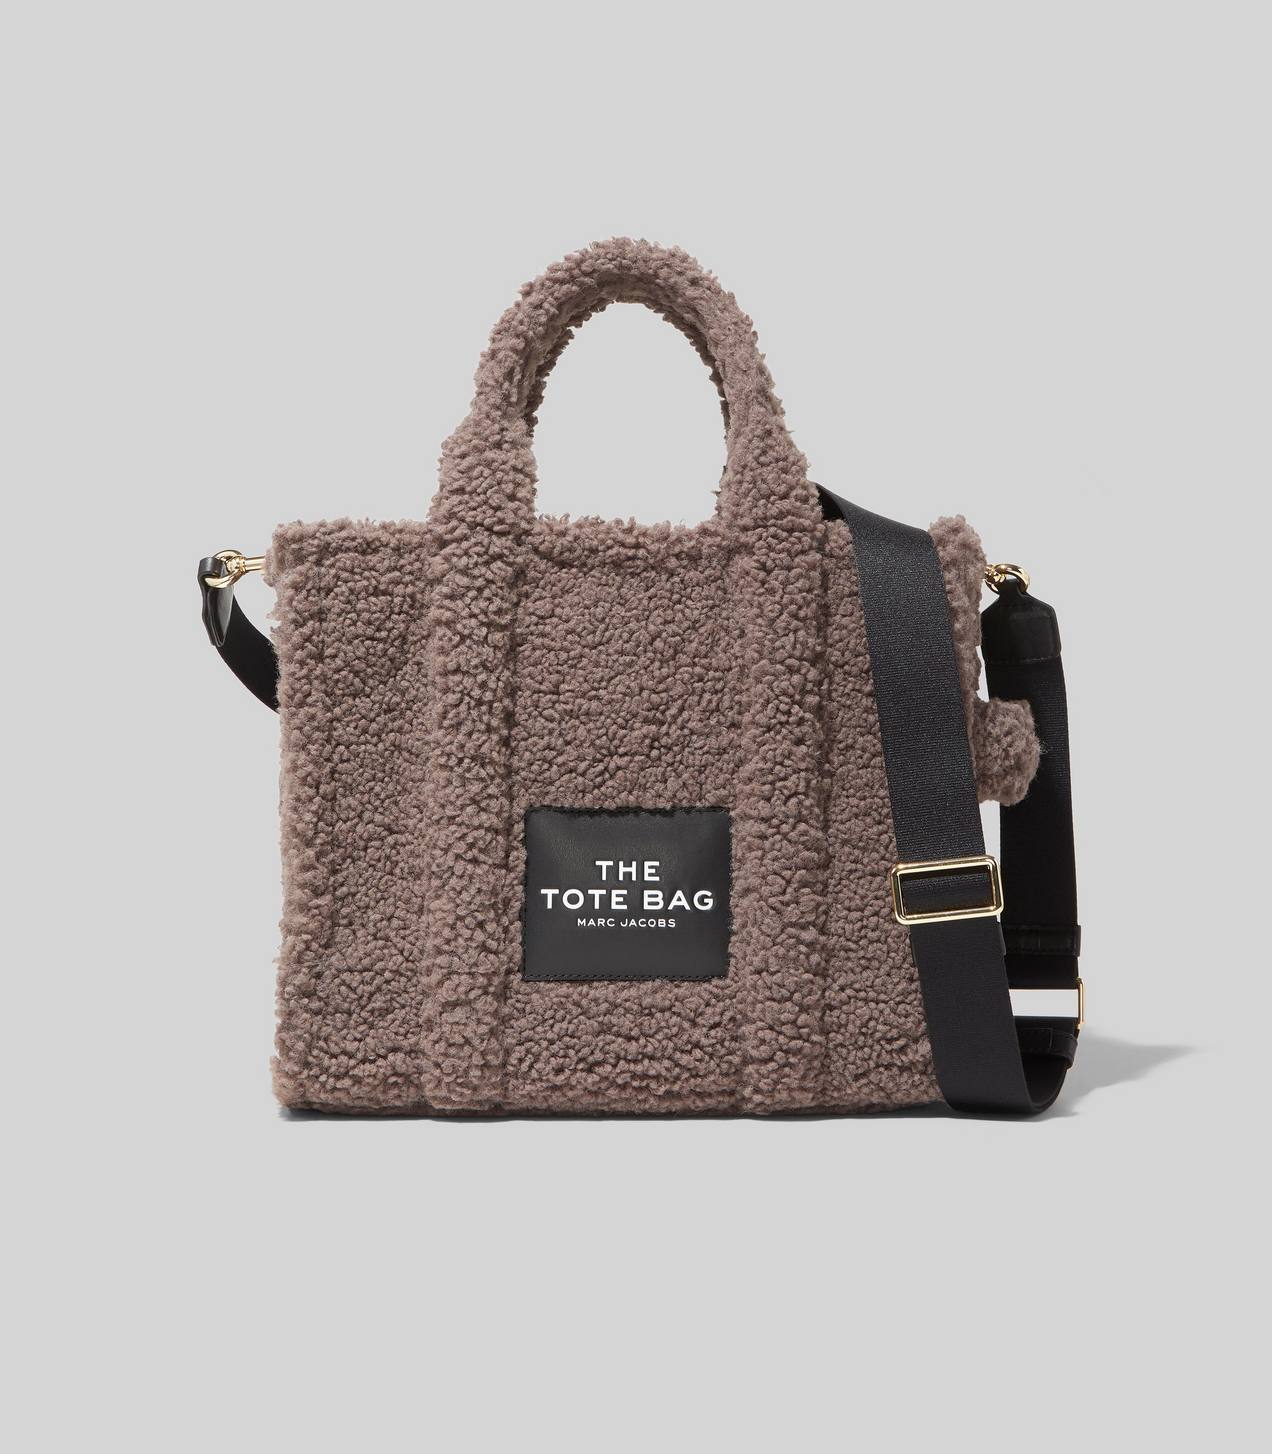 The Teddy Small Traveler Tote Bag